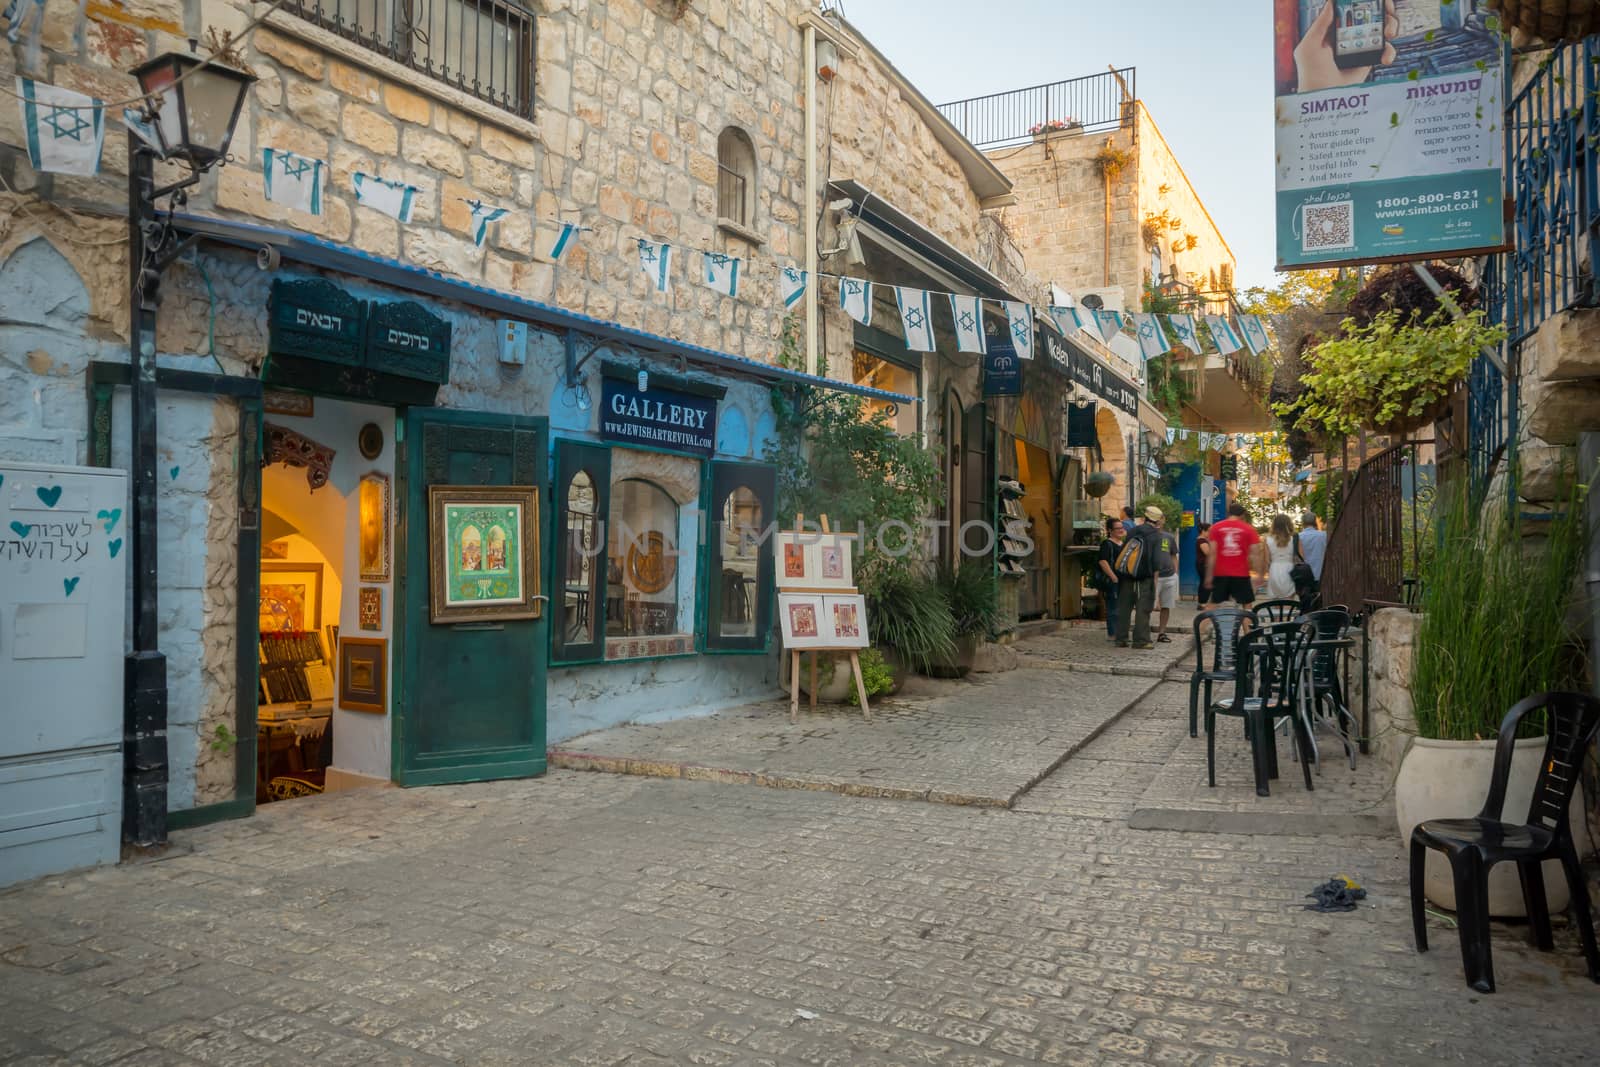 SAFED, ISRAEL - SEPTEMBER 14, 2016: Scene in an alley in the Jewish quarter, with local businesses and galleries, locals and visitors, in Safed (Tzfat), Israel